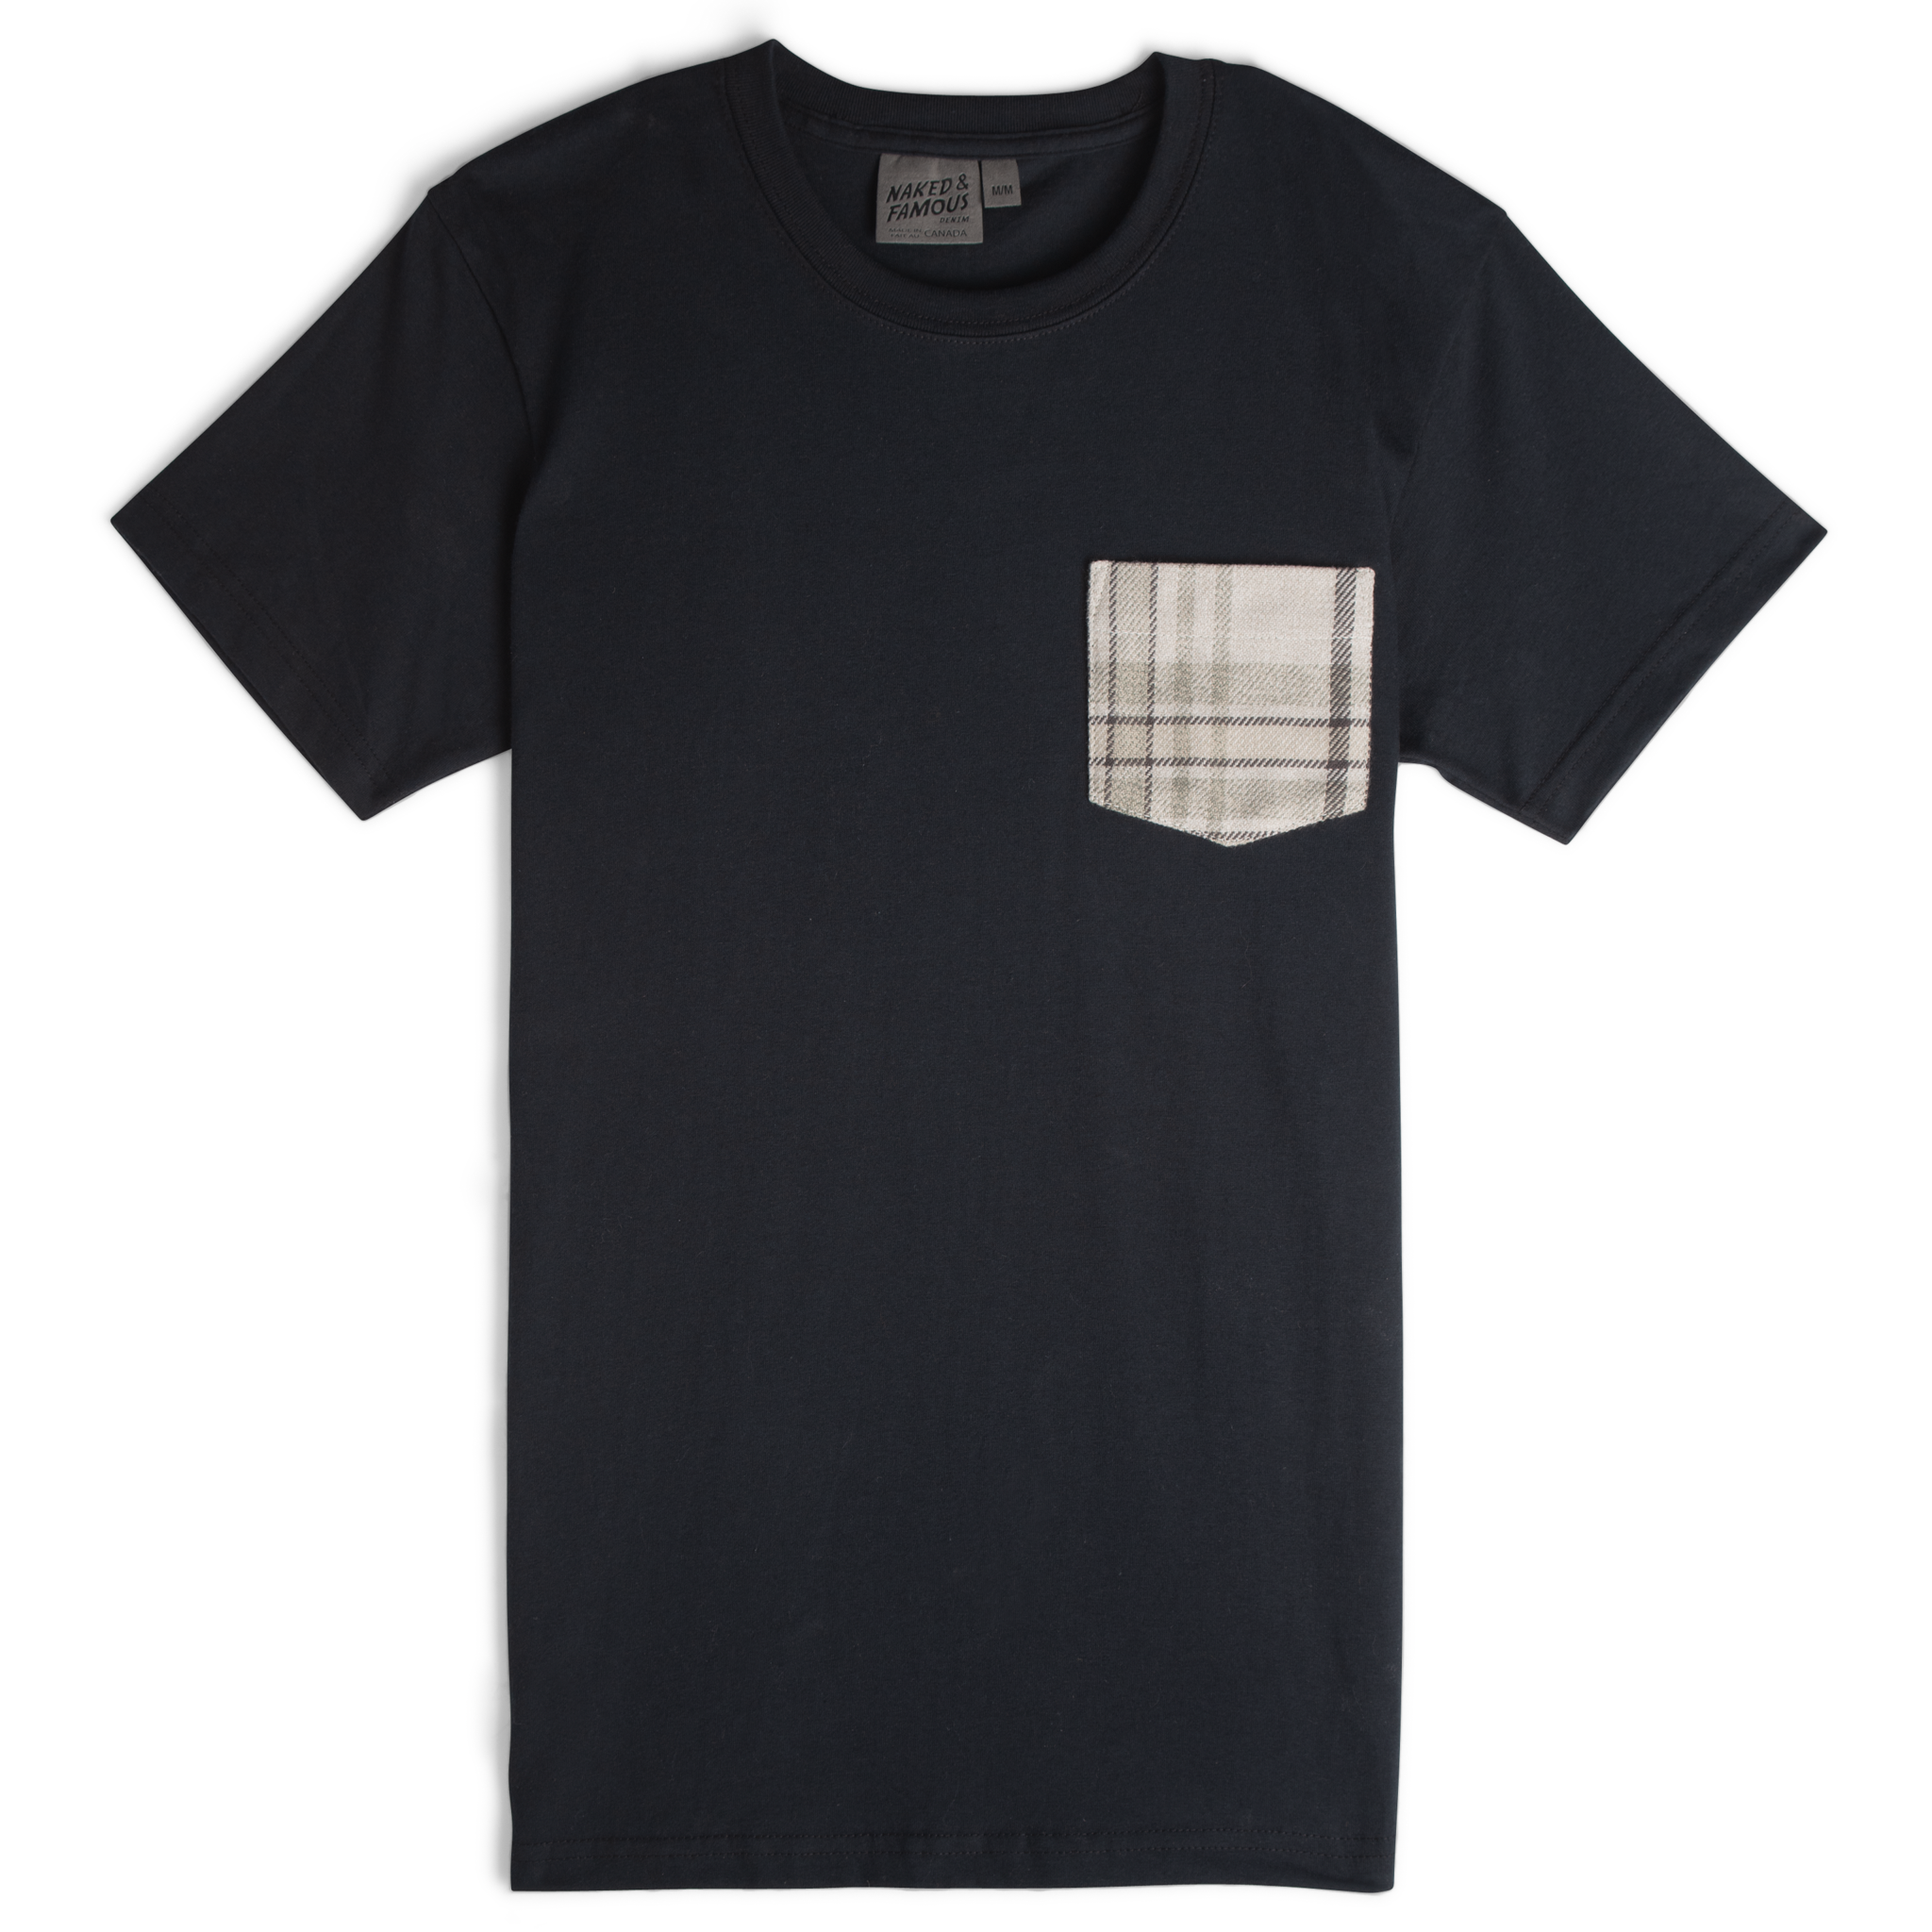  Contract Pocket Tee - Black + Heavy Vintage Flannel Pale Grey - flat front 